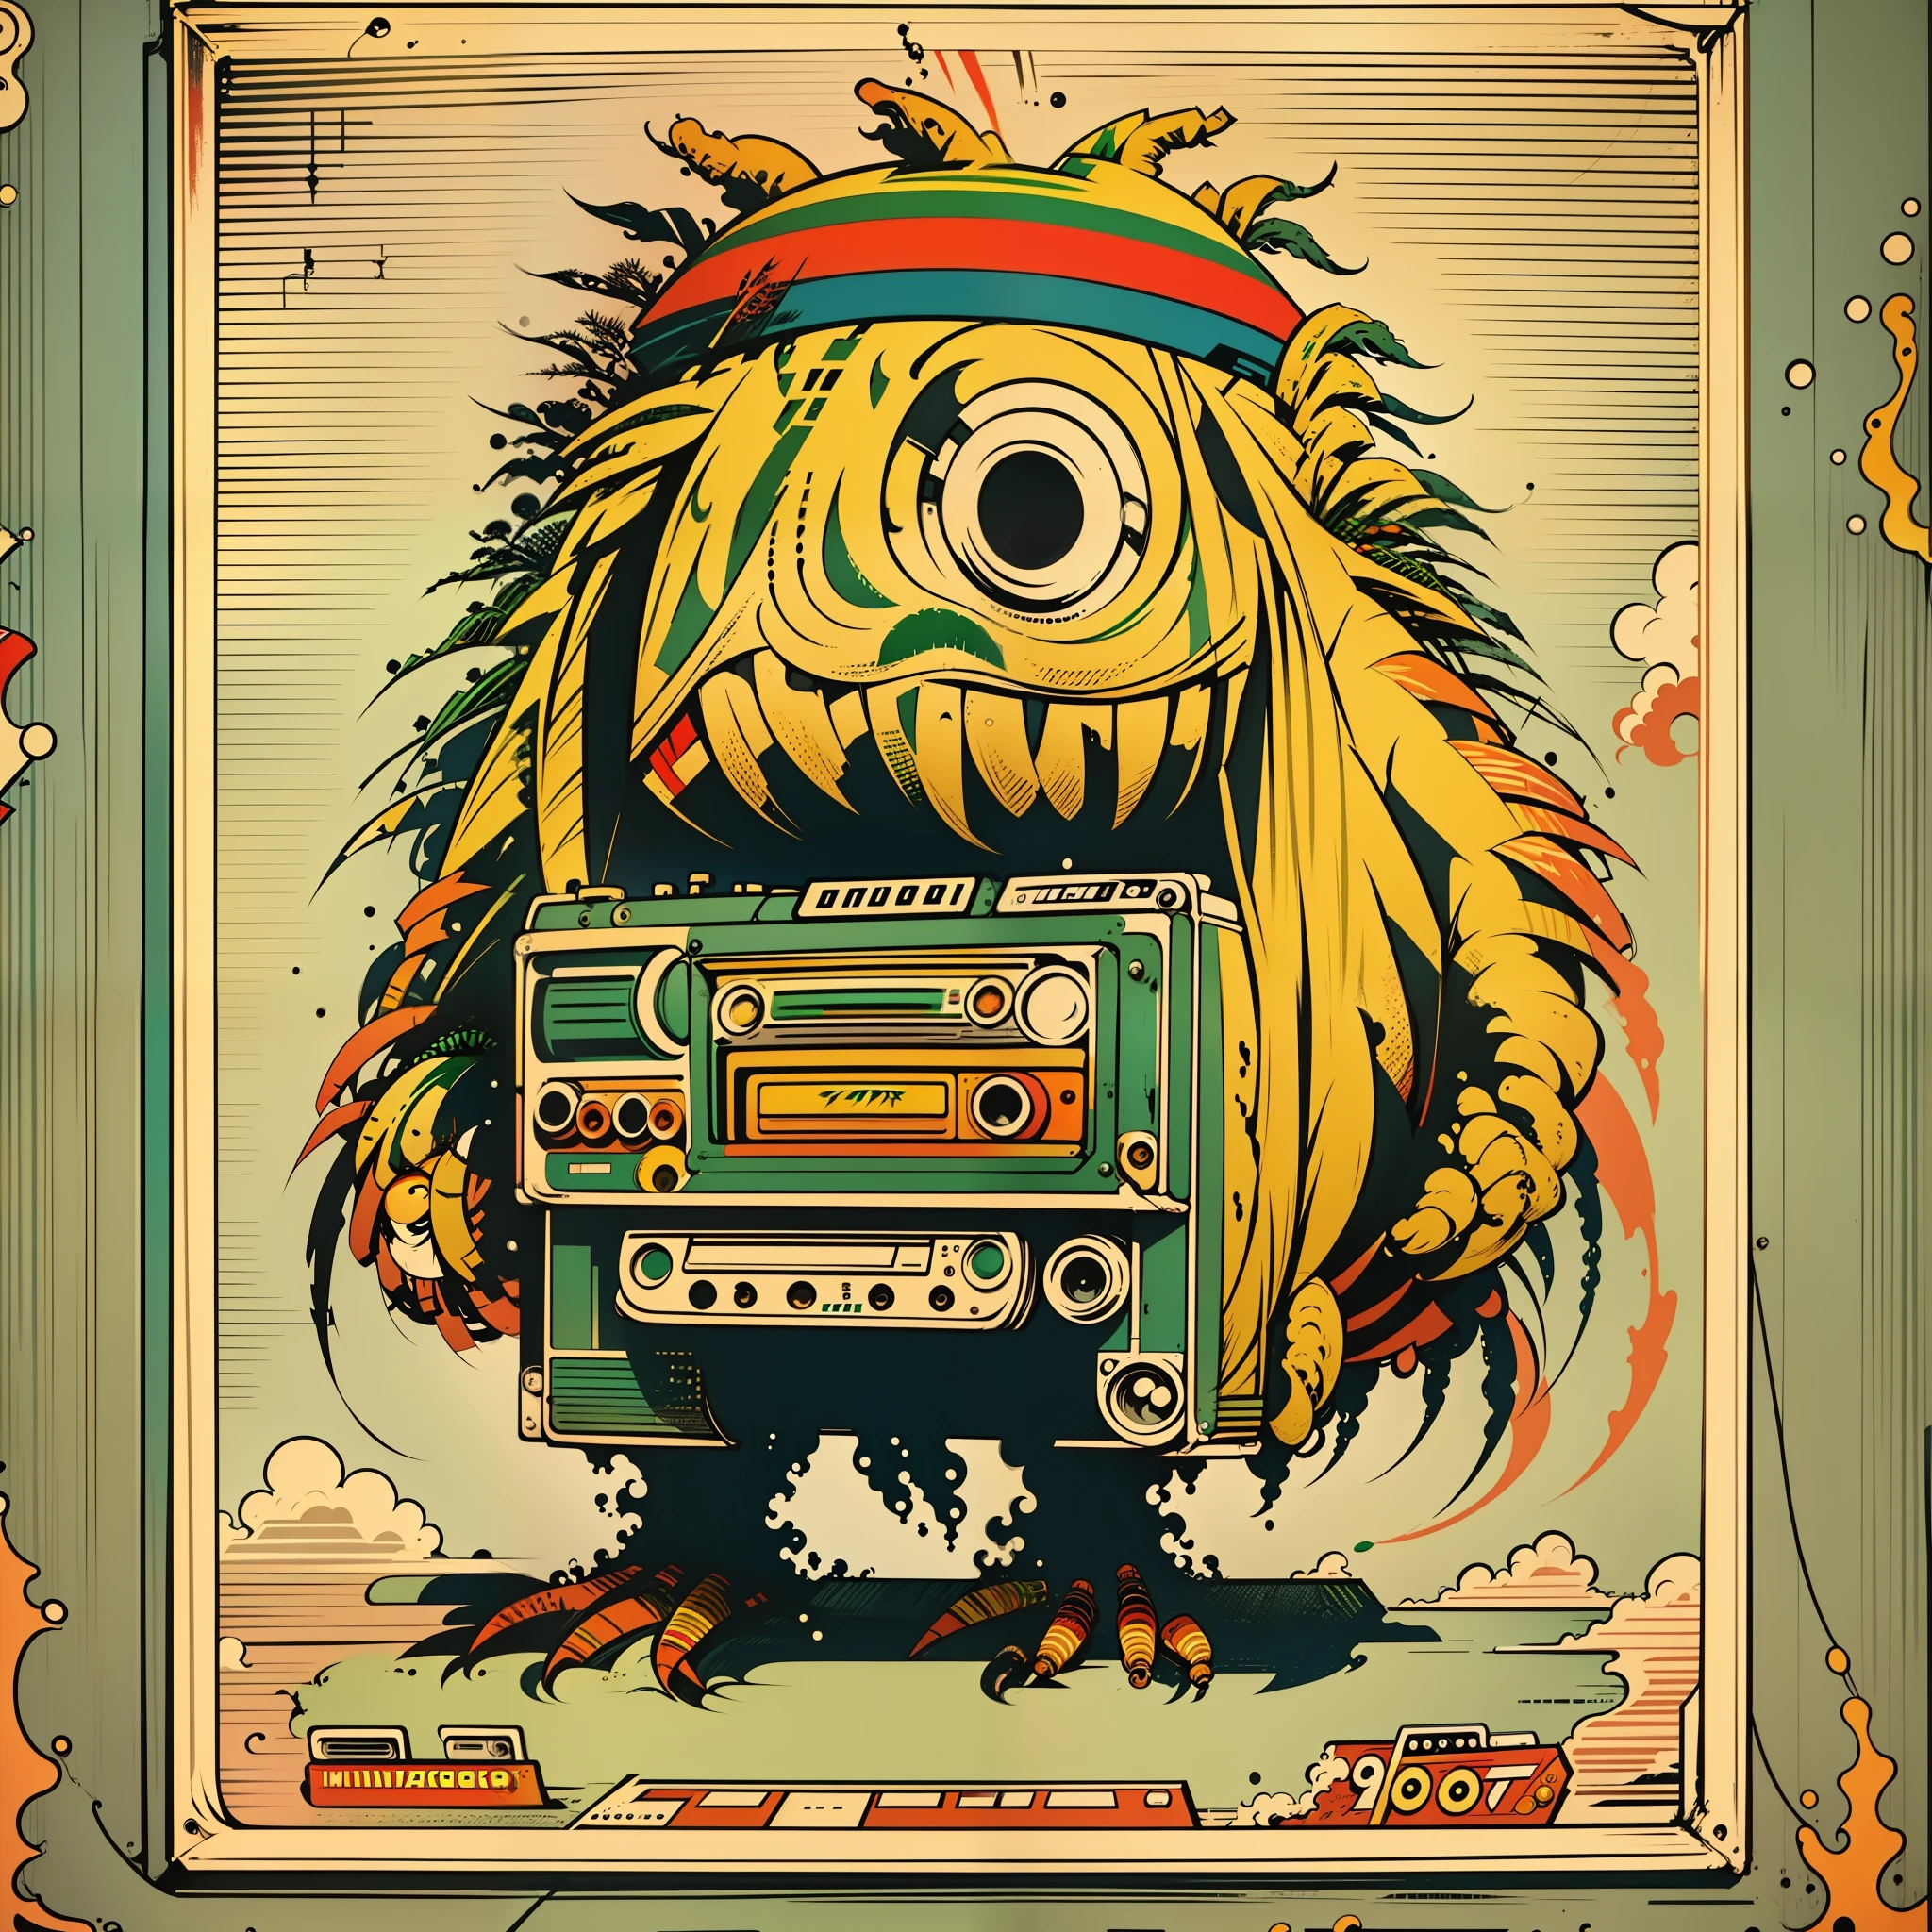 A ((((([rAstA monster])))))), ( 全身照) holding A boombox, ghetto blAster, big ghetto blAster, tApe deck, 低保真嘻哈, Audio equipments, cAssette, 复古科技, nostAlgic vibes, 1 9 6 0 s 技术, rAdios, vintAge, 60 年代, propAgAndA Poster style, 海报设计, poster Art style. 20 世纪 70 年代, 20 世纪 50 年代, 20 世纪 60 年代, 海报色彩很丰富, colour Art, 三分法则, 鼓舞人心, 1970, 低保真嘻哈, high quAlity Artwork, Artwork, poster Art style, promotionAl Artwork, 嘻哈, 1 9日, 打印, high quAlity wAllpAper, poster Artwork, style of shepherd fAirey, in A retro or vintAge style, reminiscent of clAssic Advertisements or posters. Use wArm And muted colors, cApturing the nostAlgic feel of vintAge Artwork, 鸟瞰图